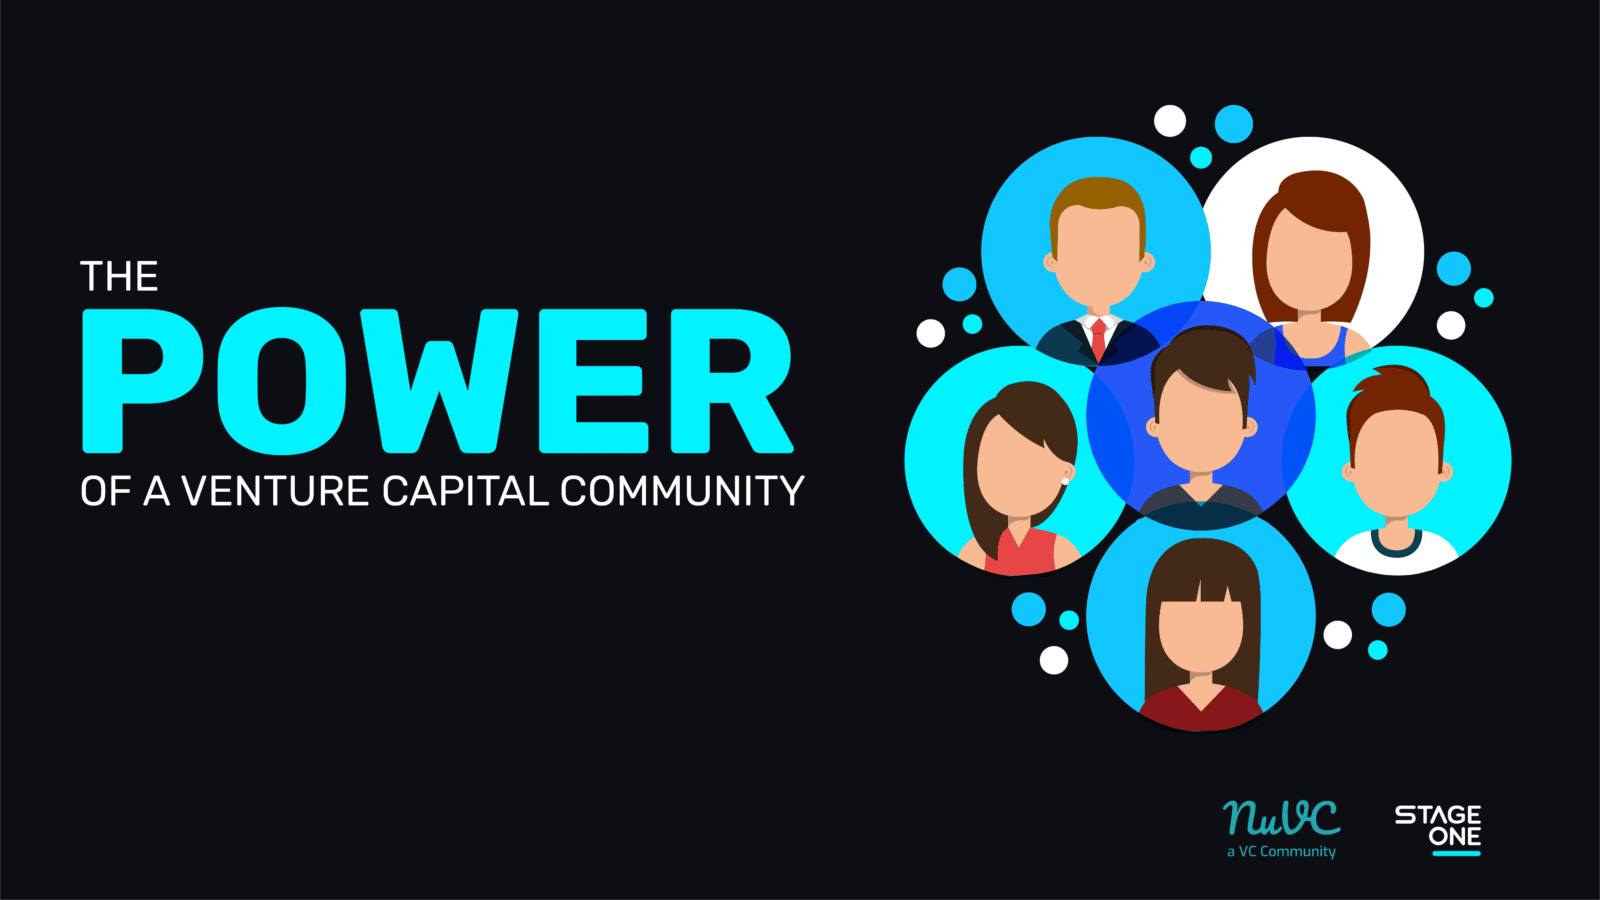 NuVC: The Power of a Venture Capital Community